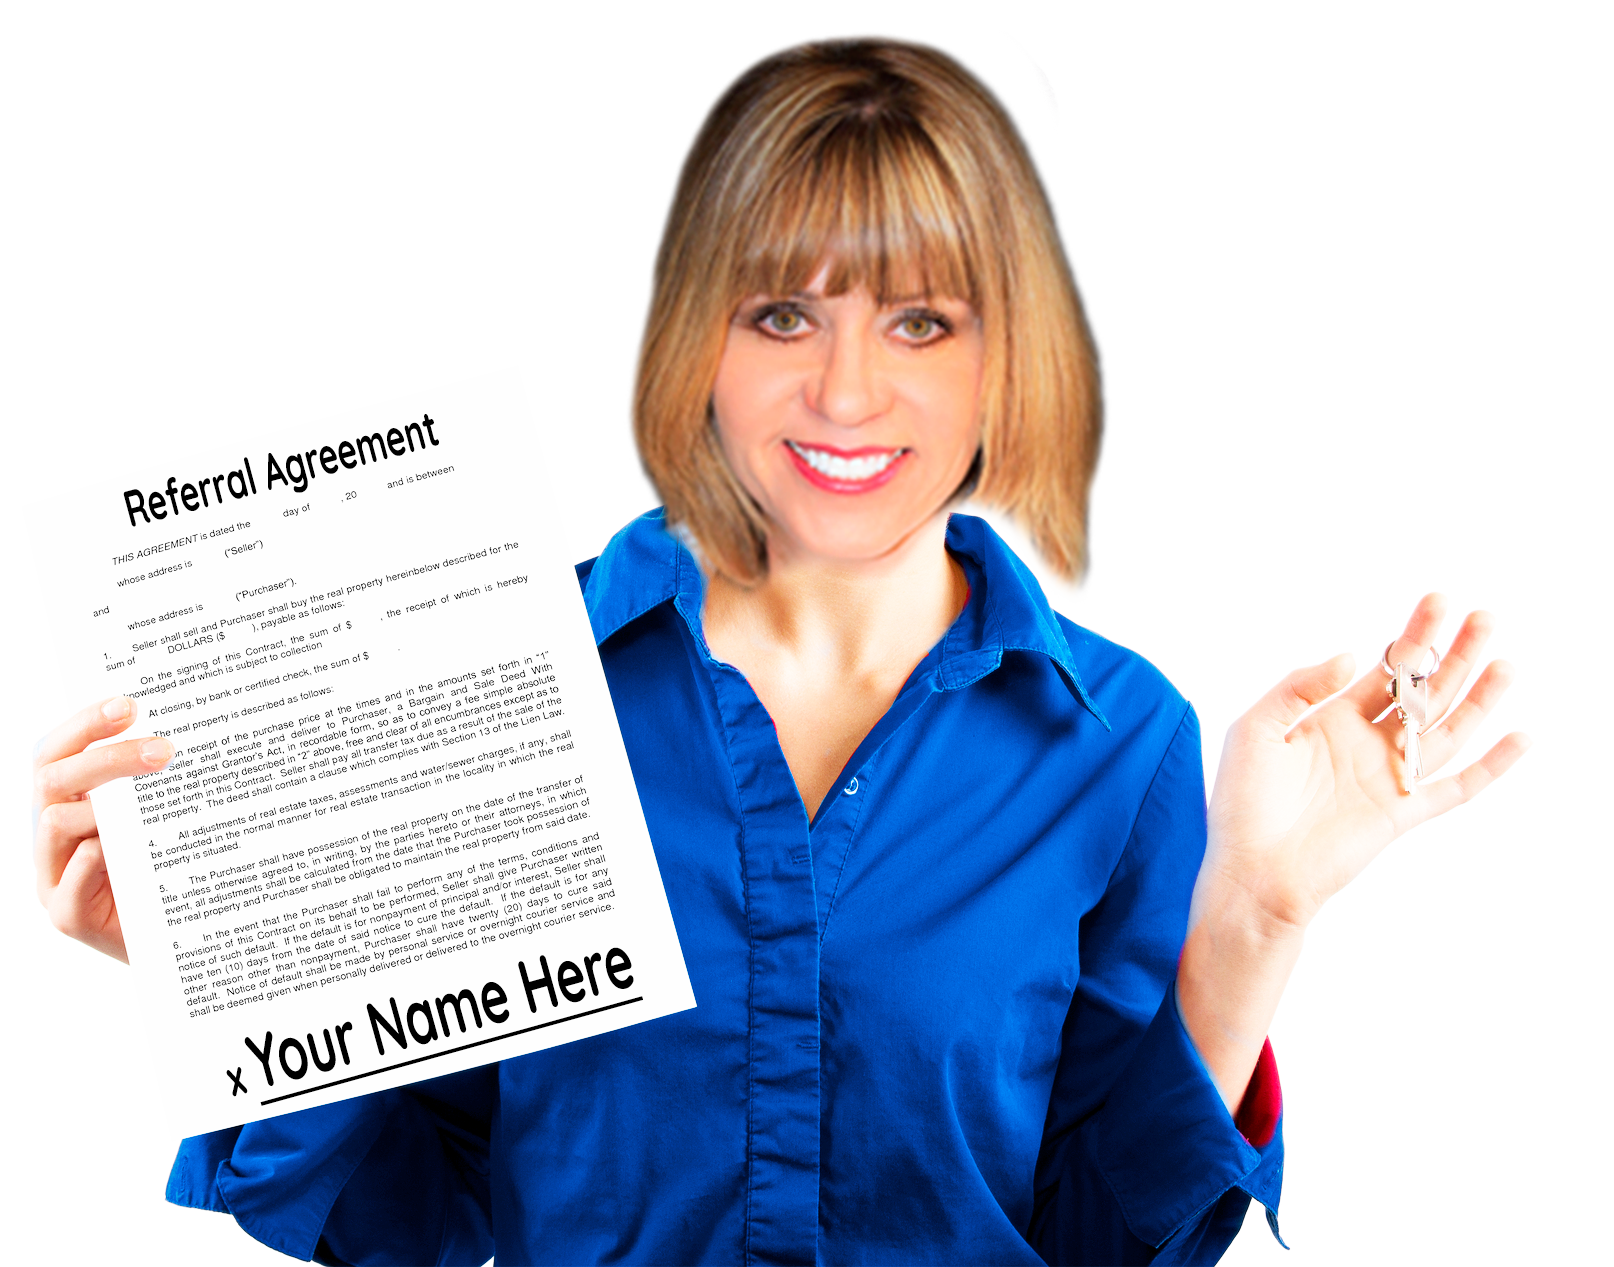 A female Real estate agent holding a referral agreement document in one hand and holding up a set of keys in her other hand.